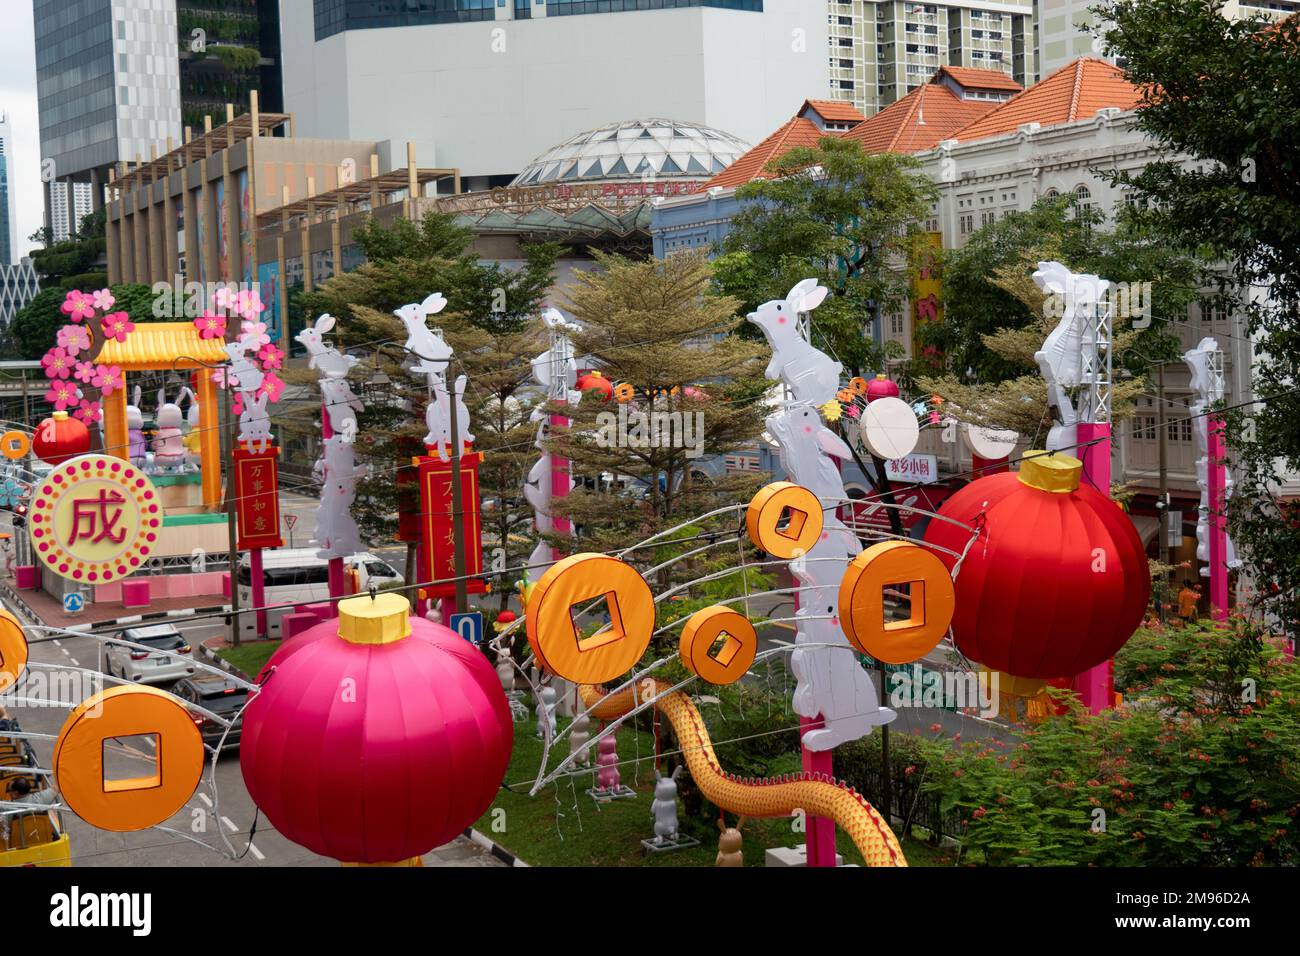 Chinese New Year decorations for Year of the Rabbit over New Bridge Road Chinatown Singapore. Stock Photo